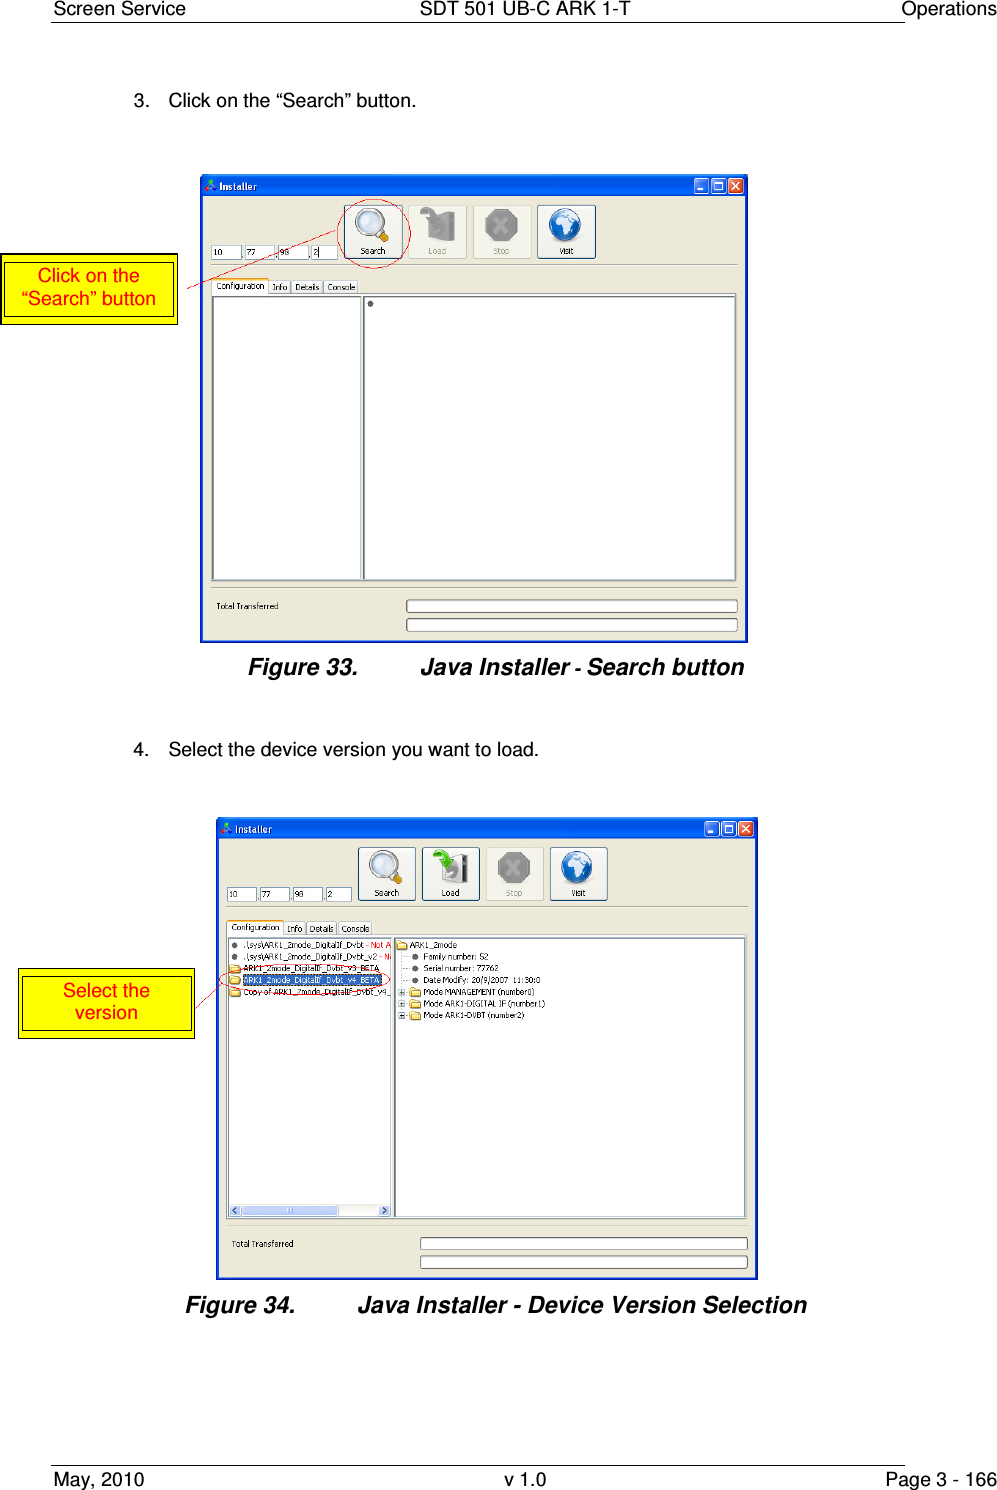 Screen Service  SDT 501 UB-C ARK 1-T  Operations May, 2010  v 1.0  Page 3 - 166 3.  Click on the “Search” button. Figure 33.  Java Installer - Search button  4.  Select the device version you want to load. Figure 34.  Java Installer - Device Version Selection  Click on the “Search” button Select the version 